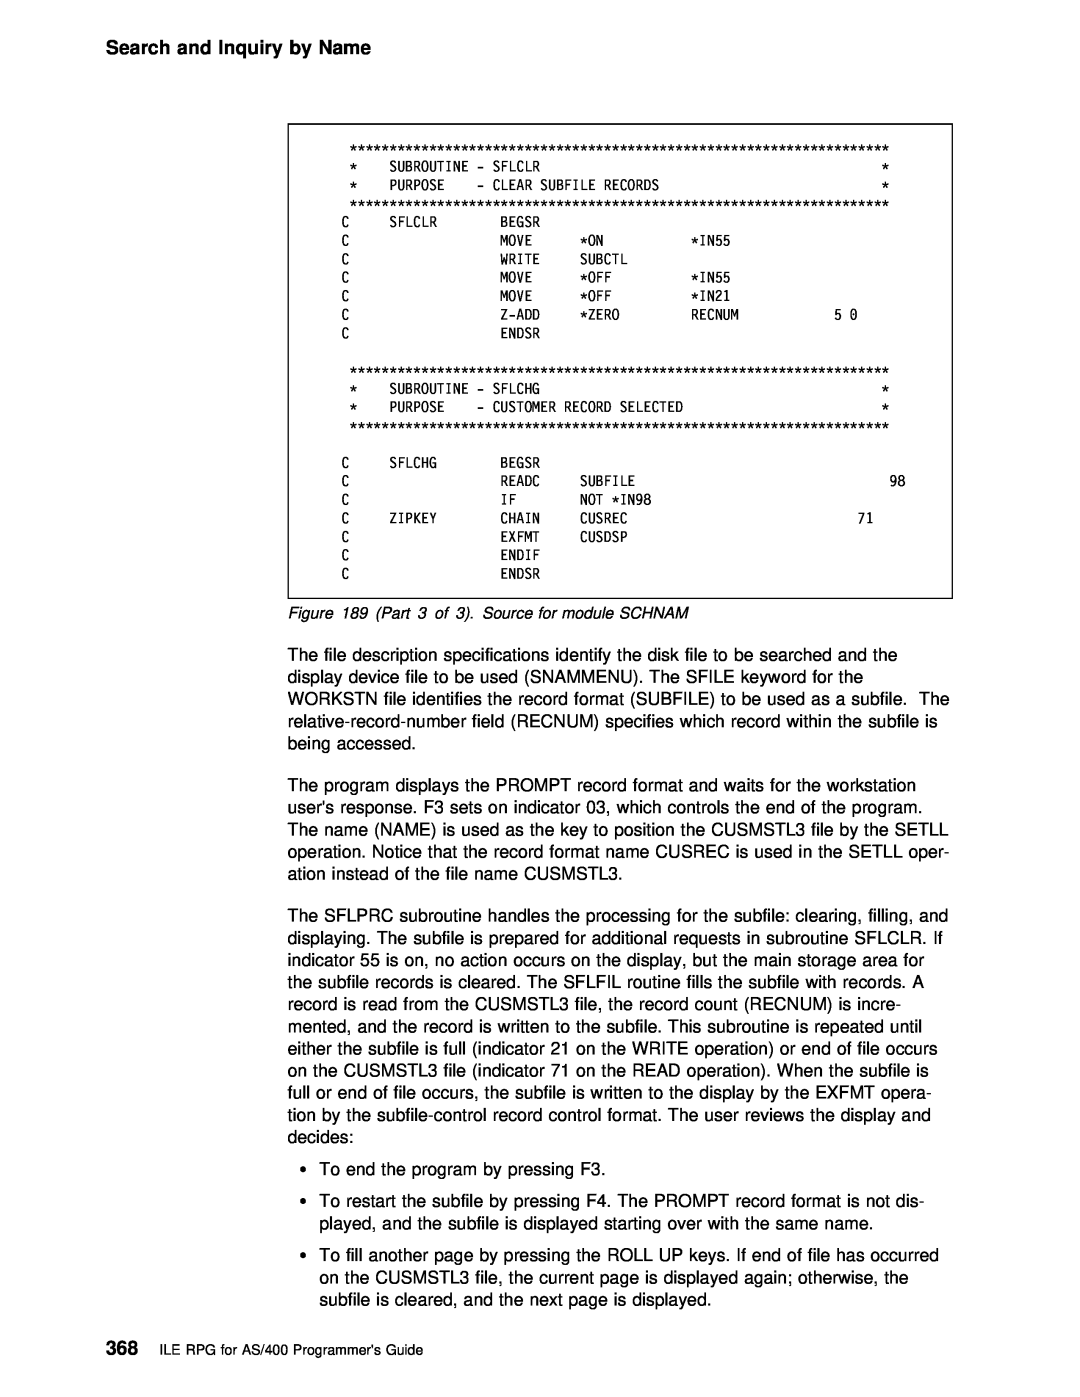 IBM AS/400 manual ¹ To, Search and Inquiry by Name, Subroutine 